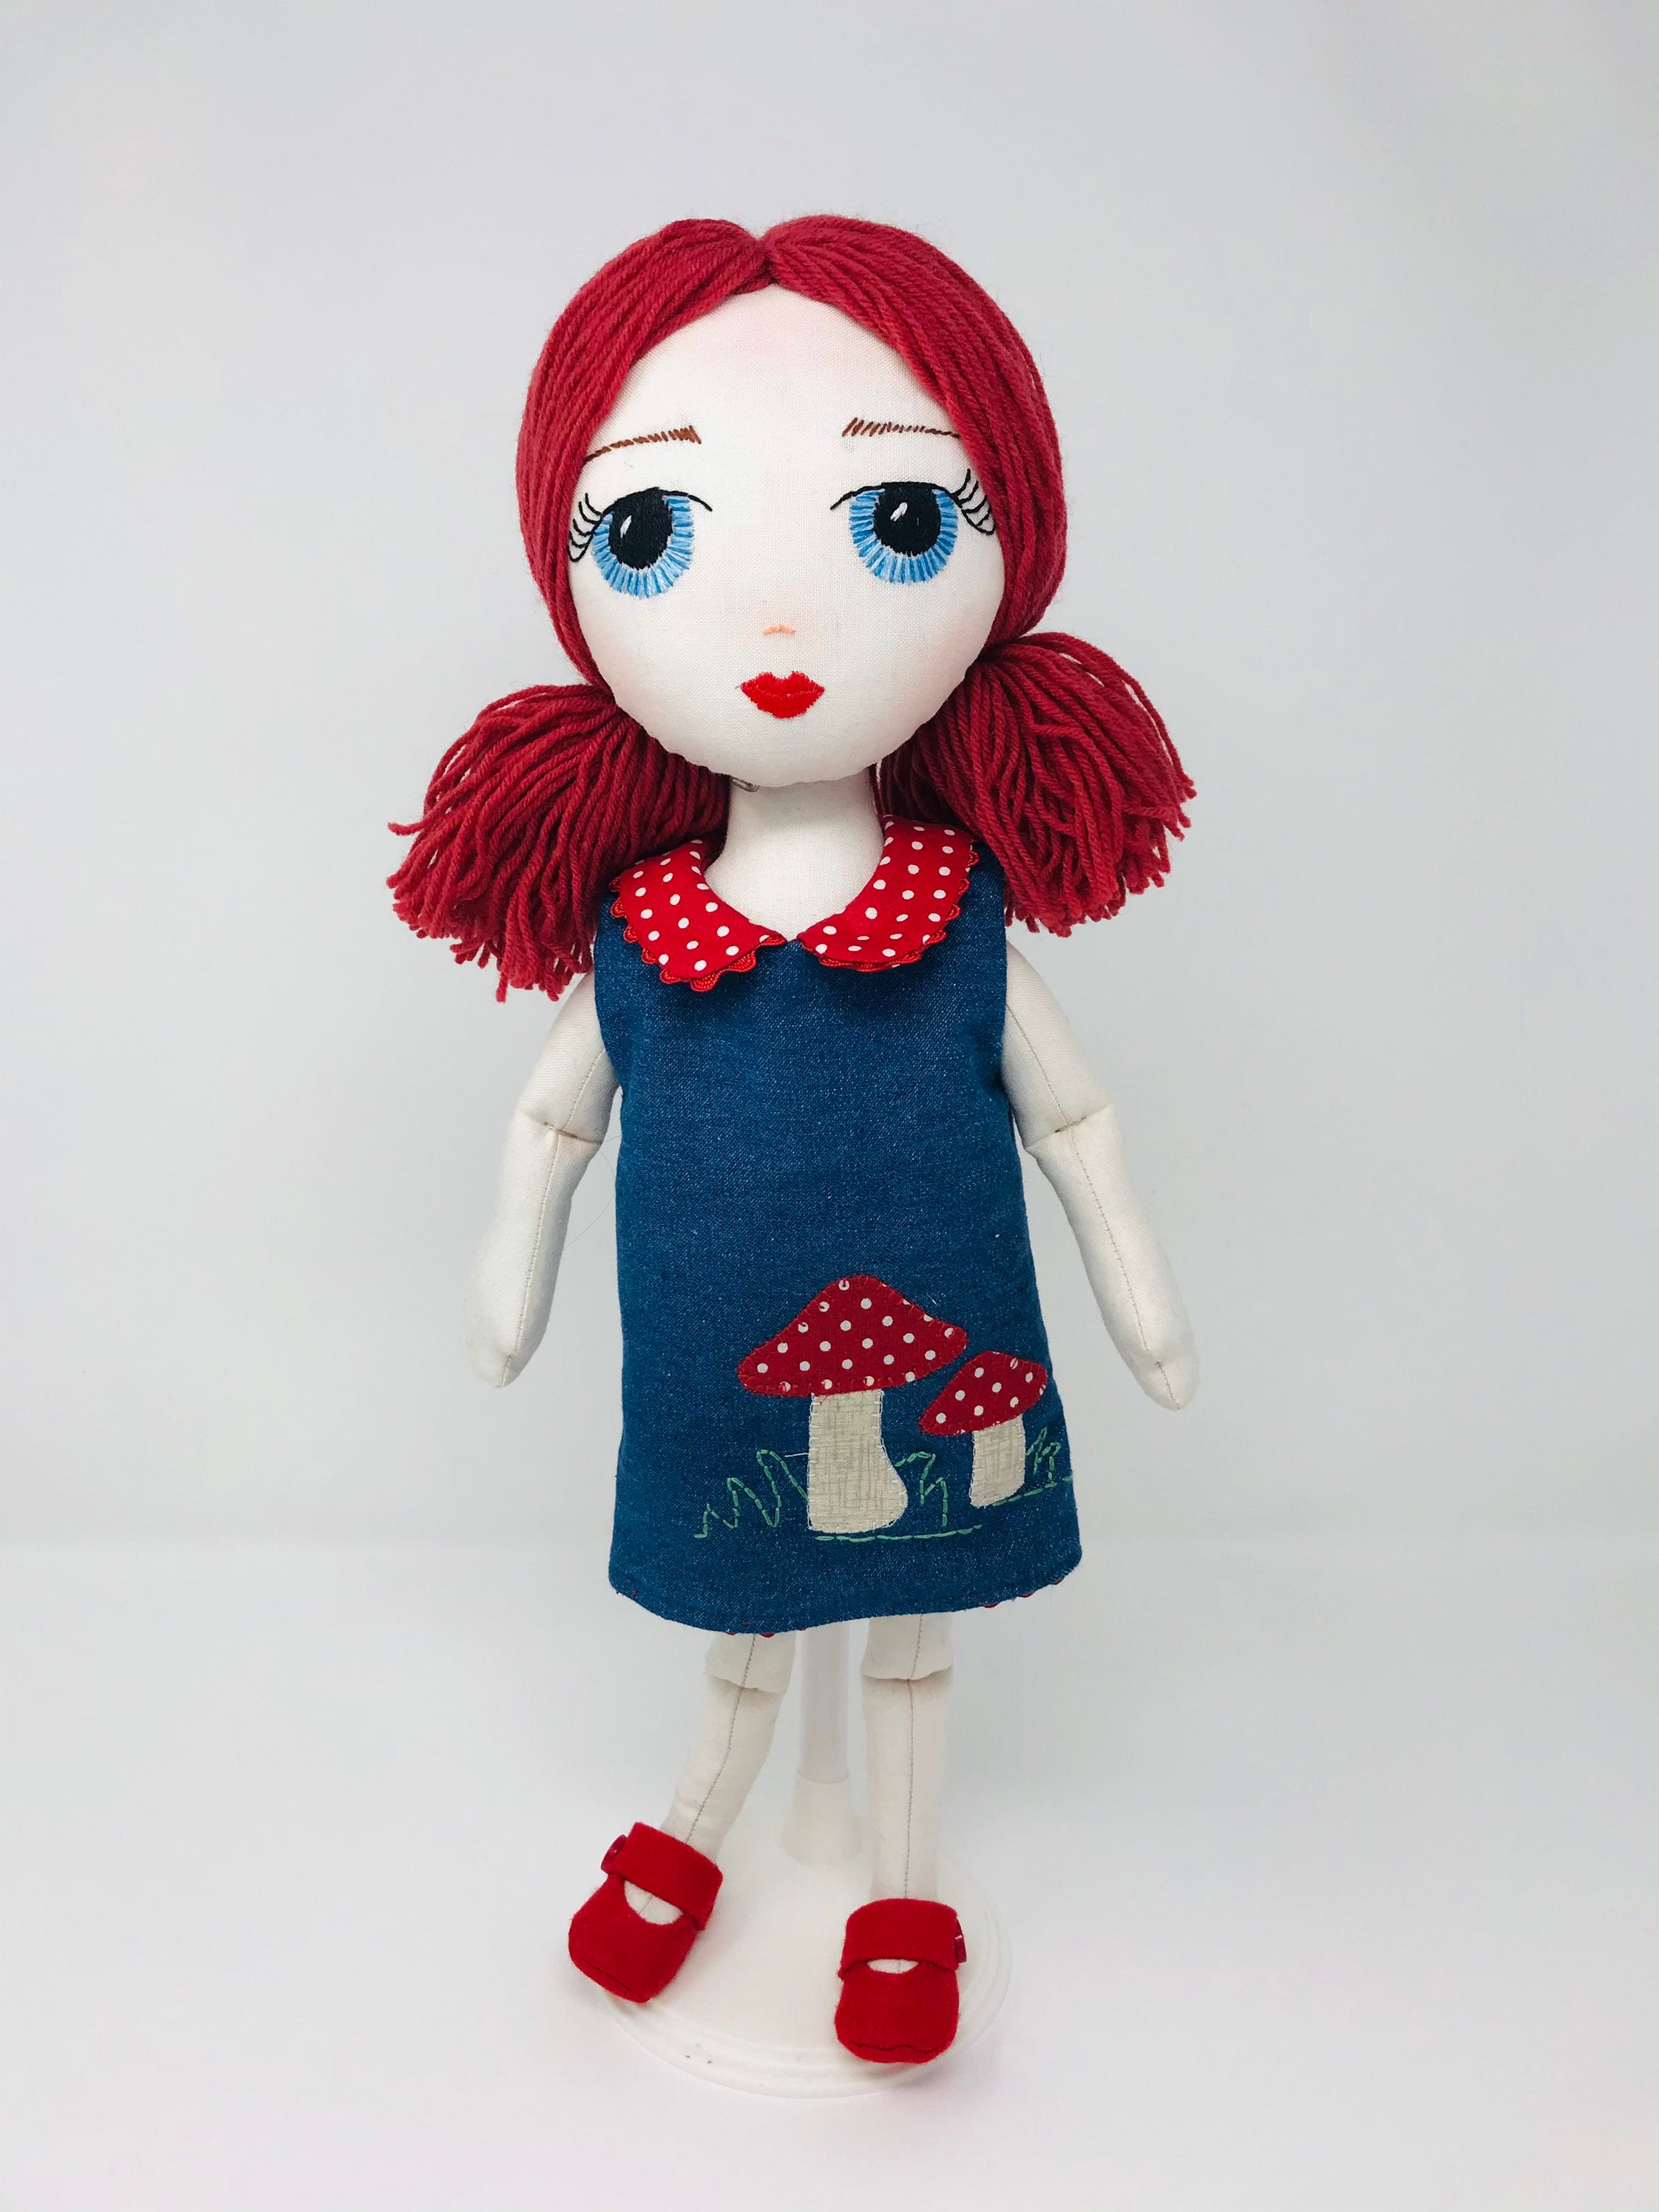 Meli doll Handmade Doll in Jeans dress and Red hair. | Etsy